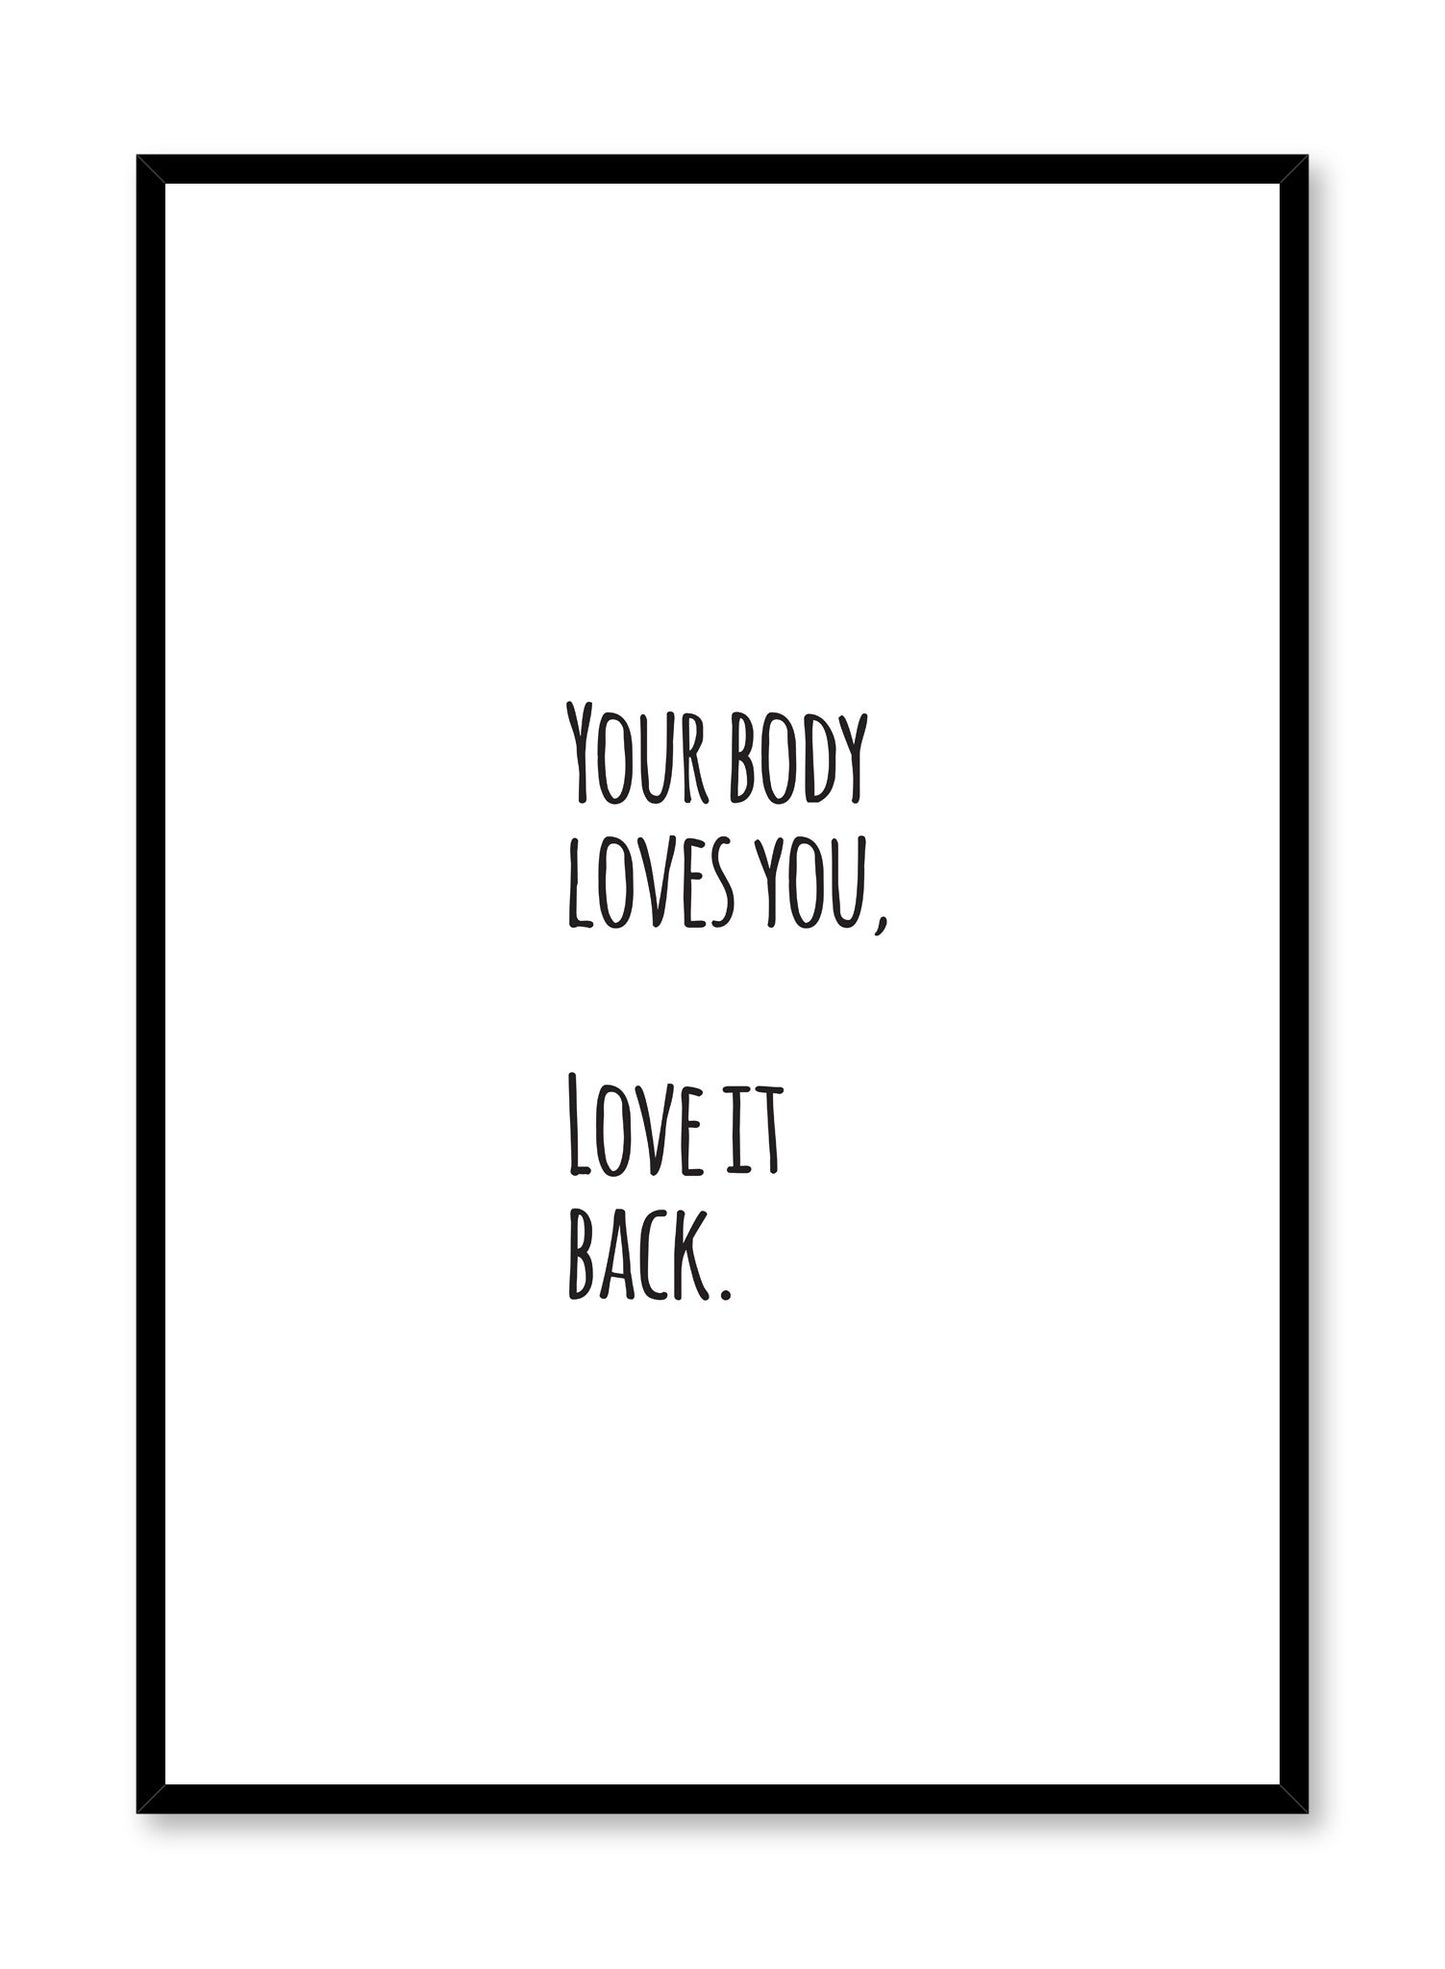 Scandinavian art print by Opposite Wall with graphic motivational Self Love quote design